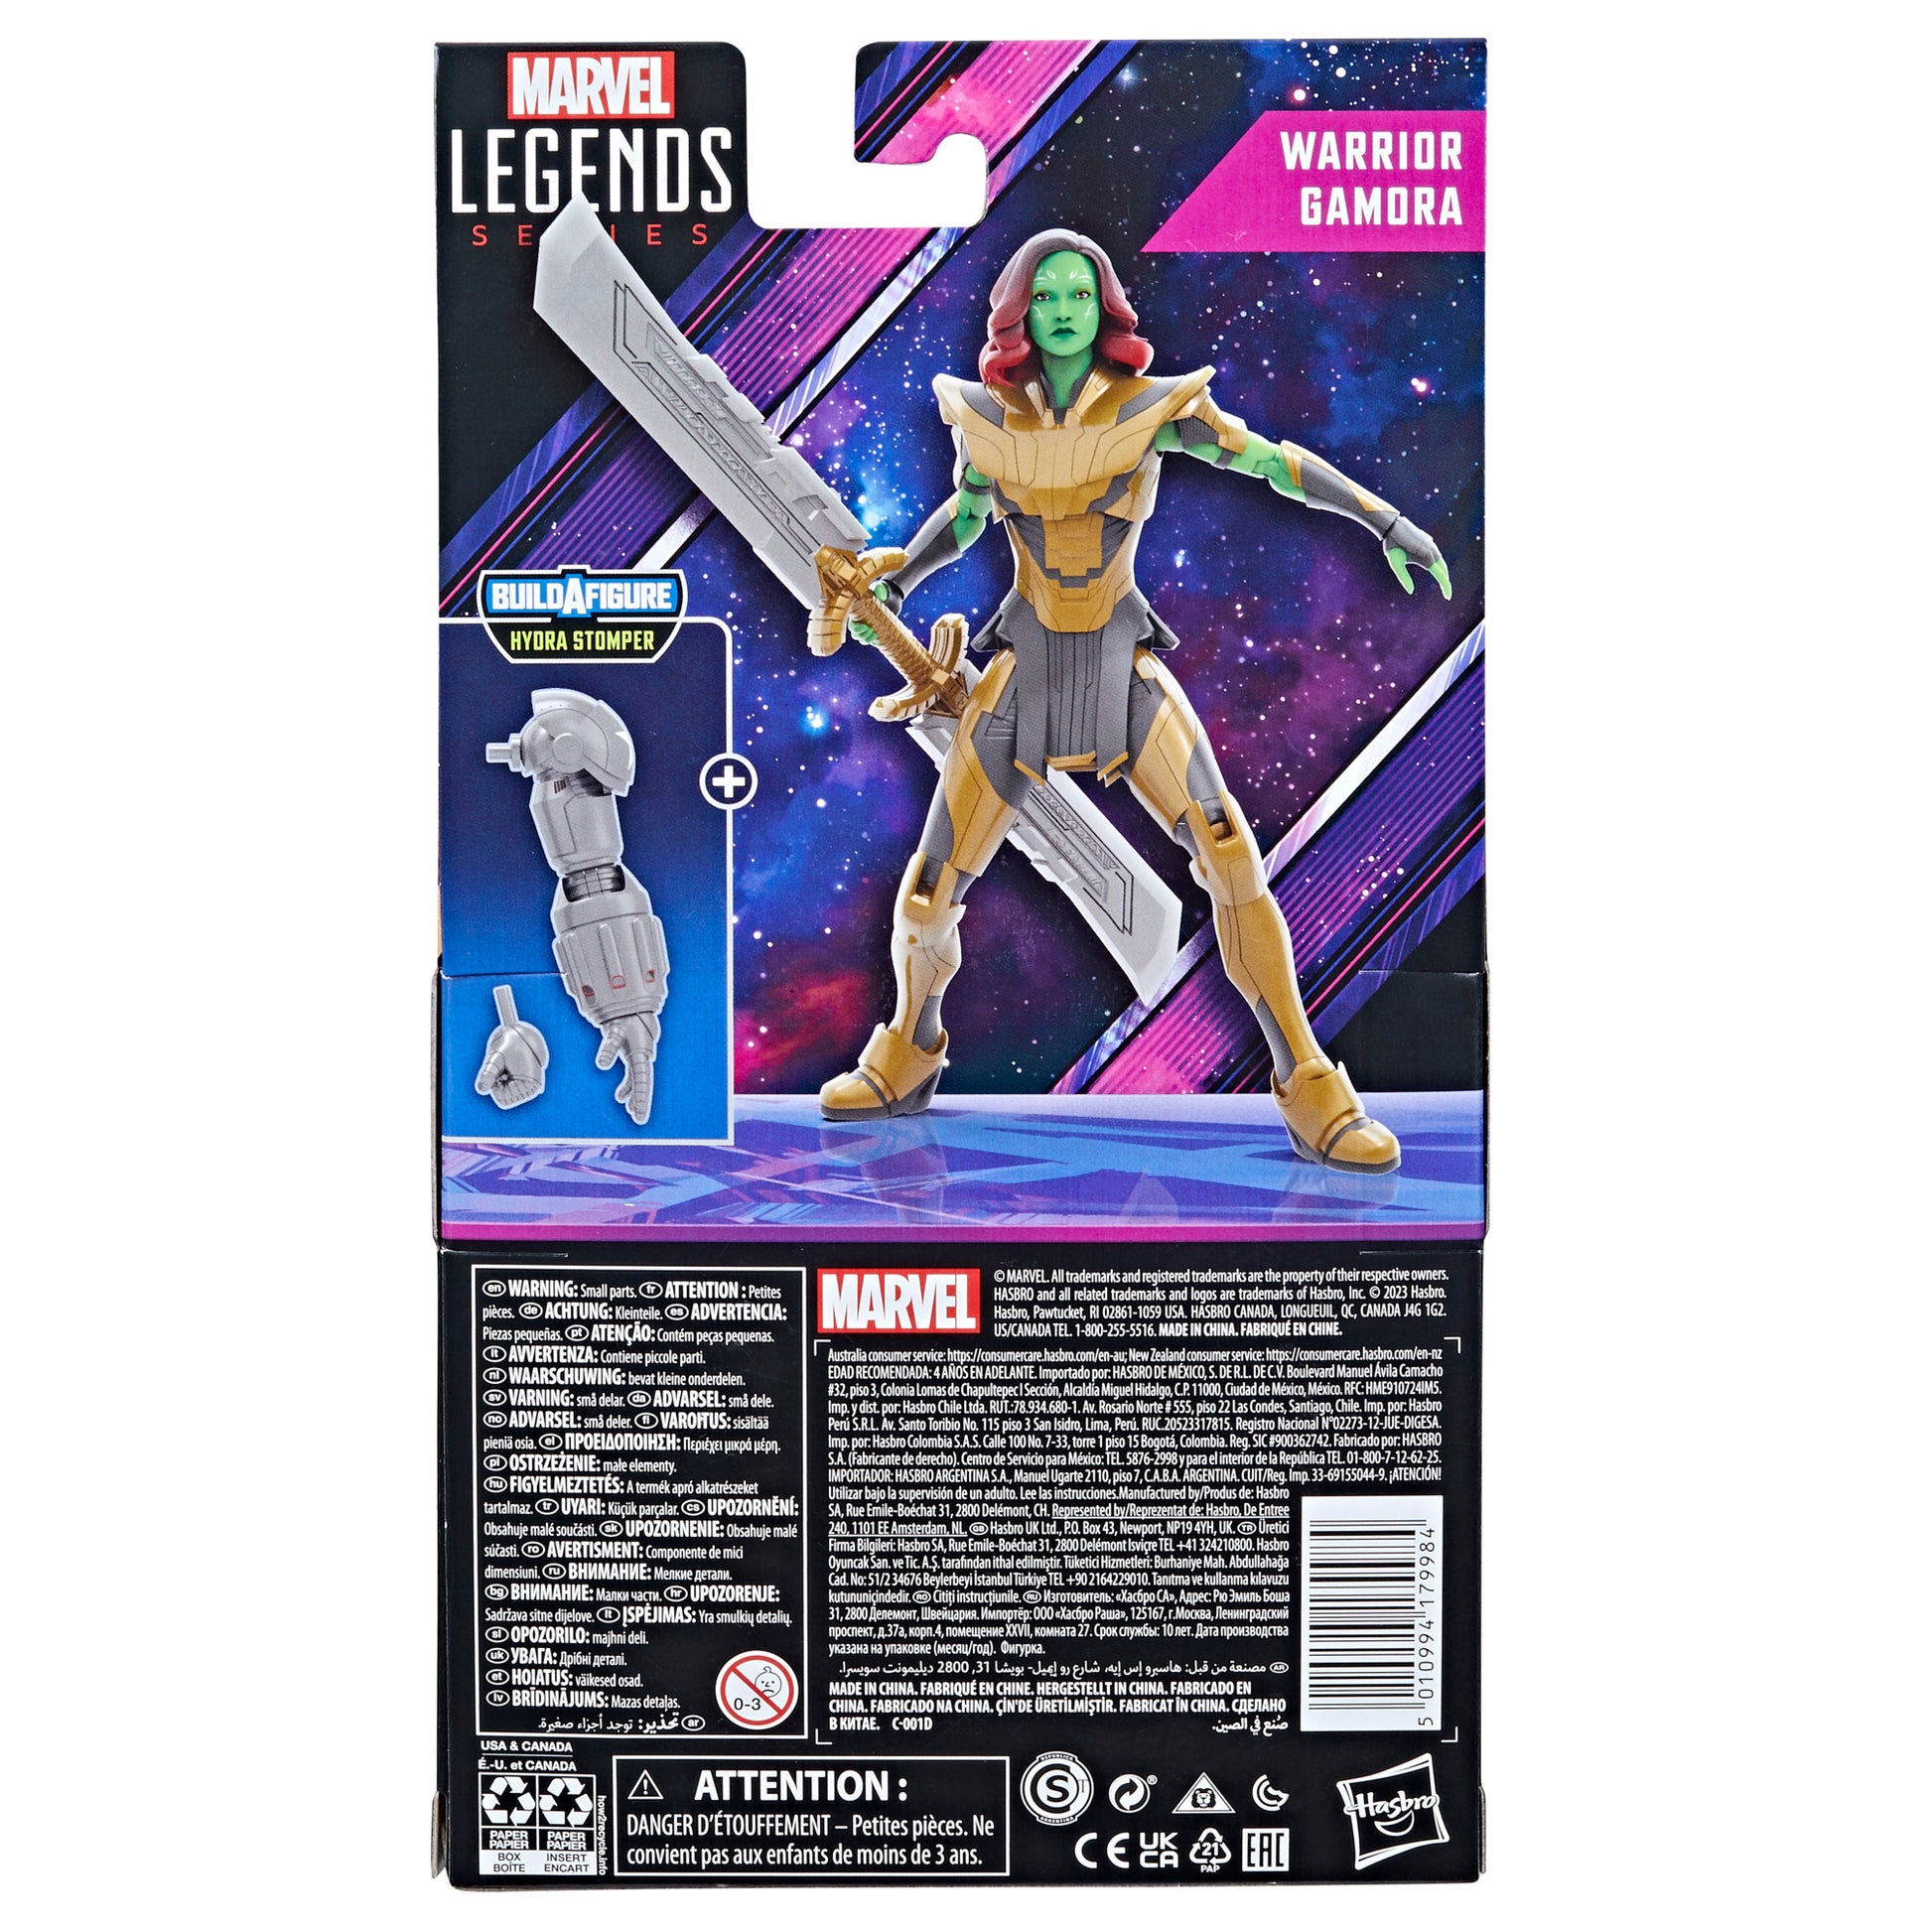 Warrior Gamora Action Figure 6-Inch Toy back view of the box - heretoserveyou